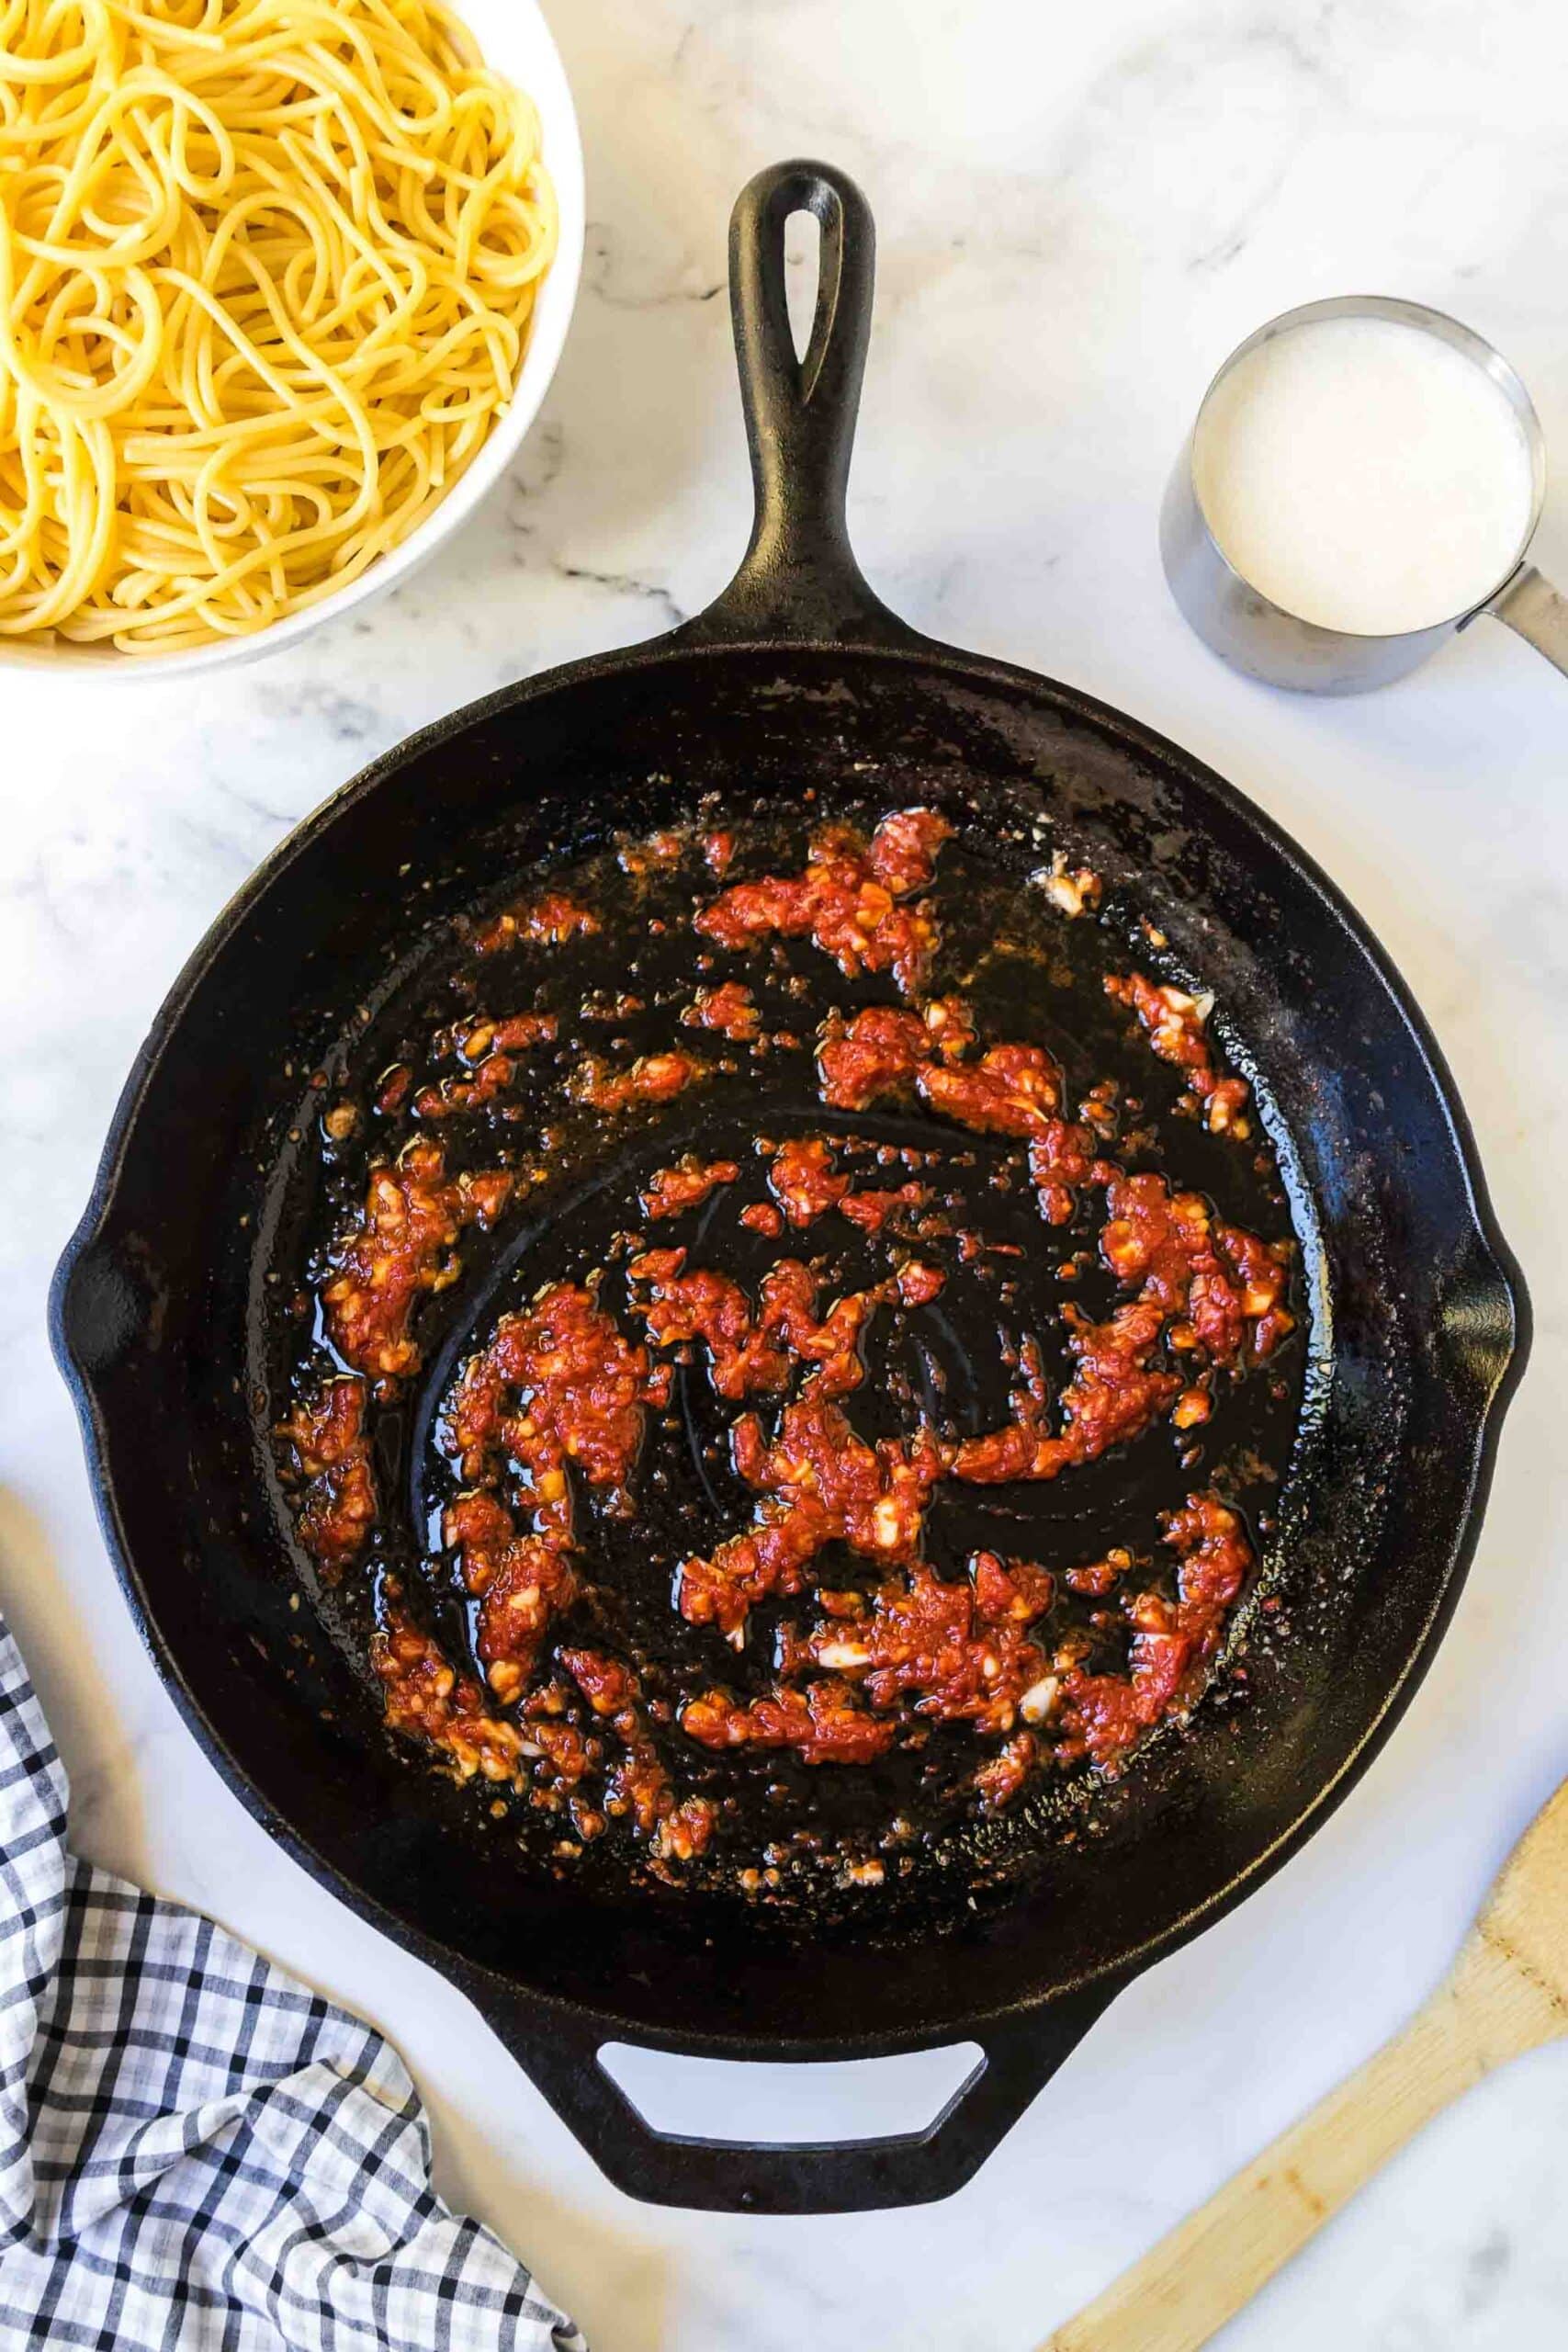 Tomato paste and garlic being cooked in an iron skillet.